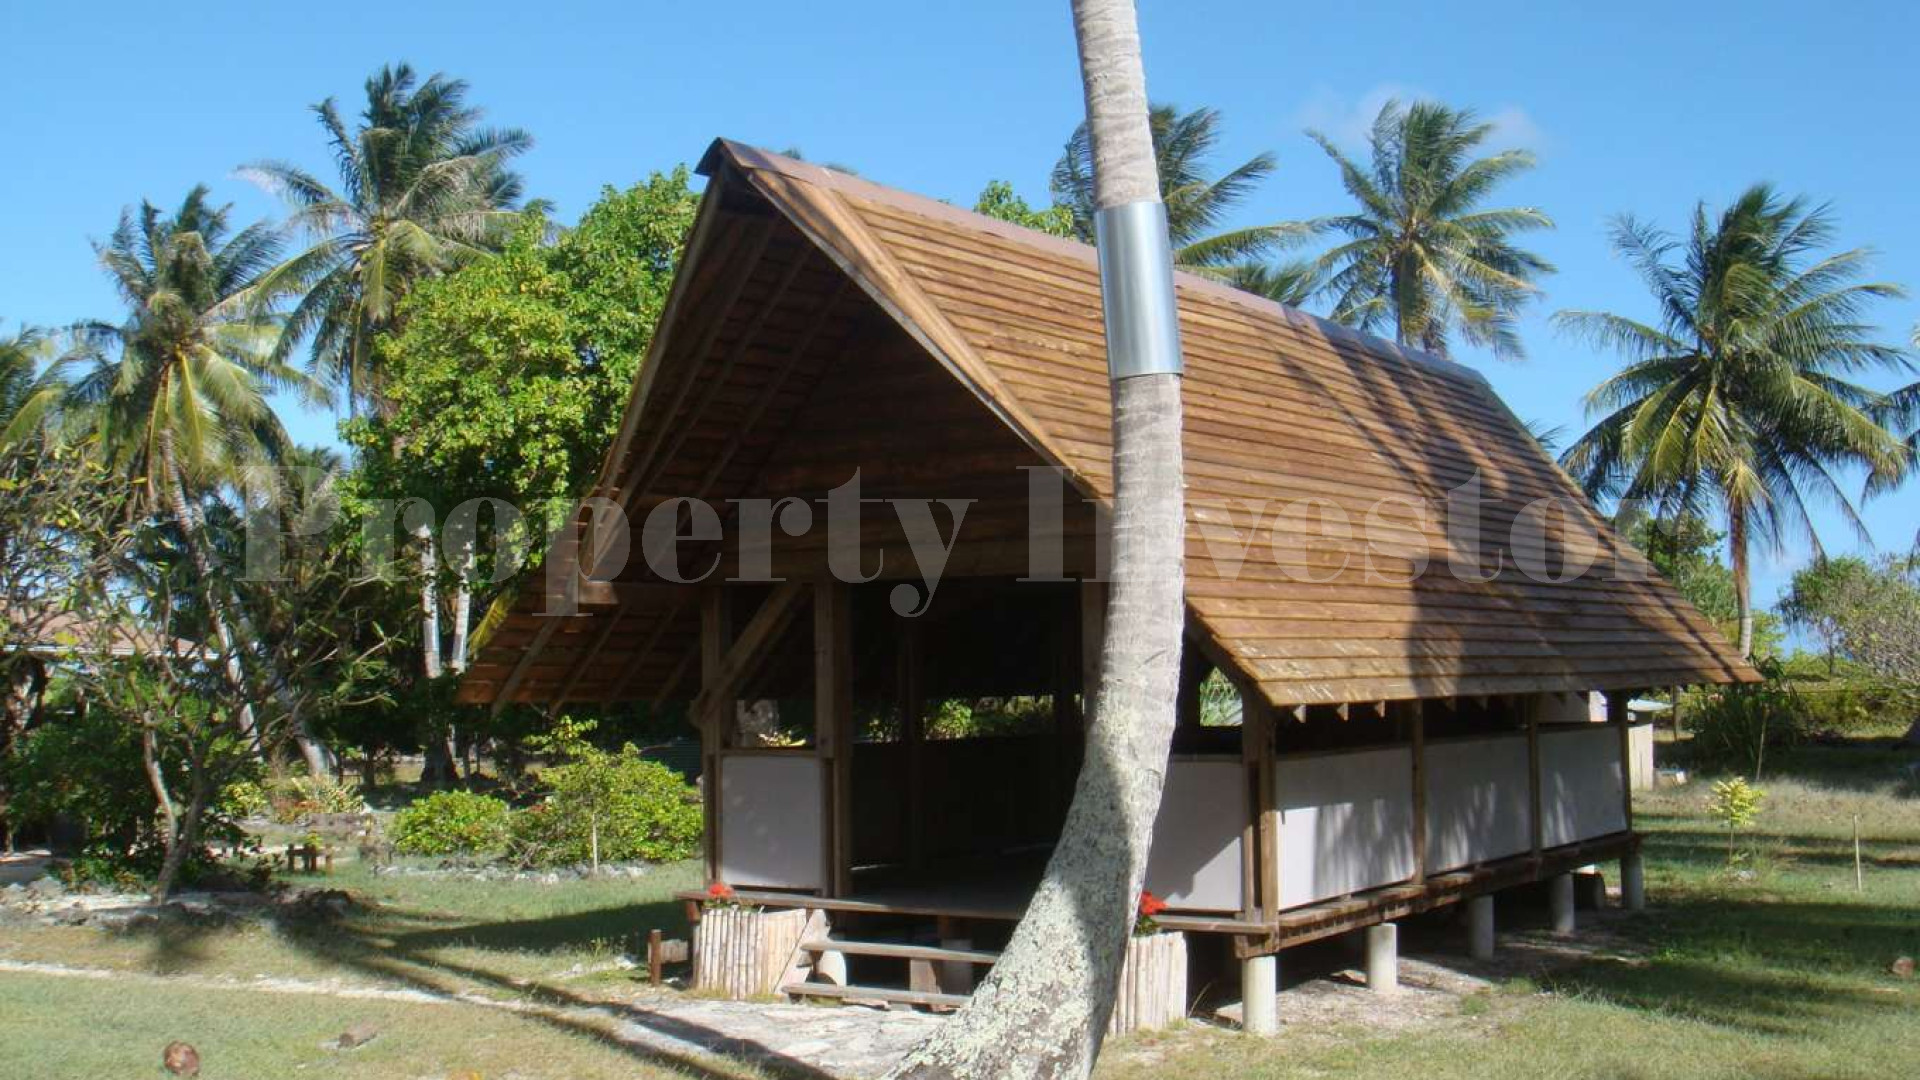 3.36 Hectare Private Boutique Island Retreat with 5 Bungalows in French Polynesia